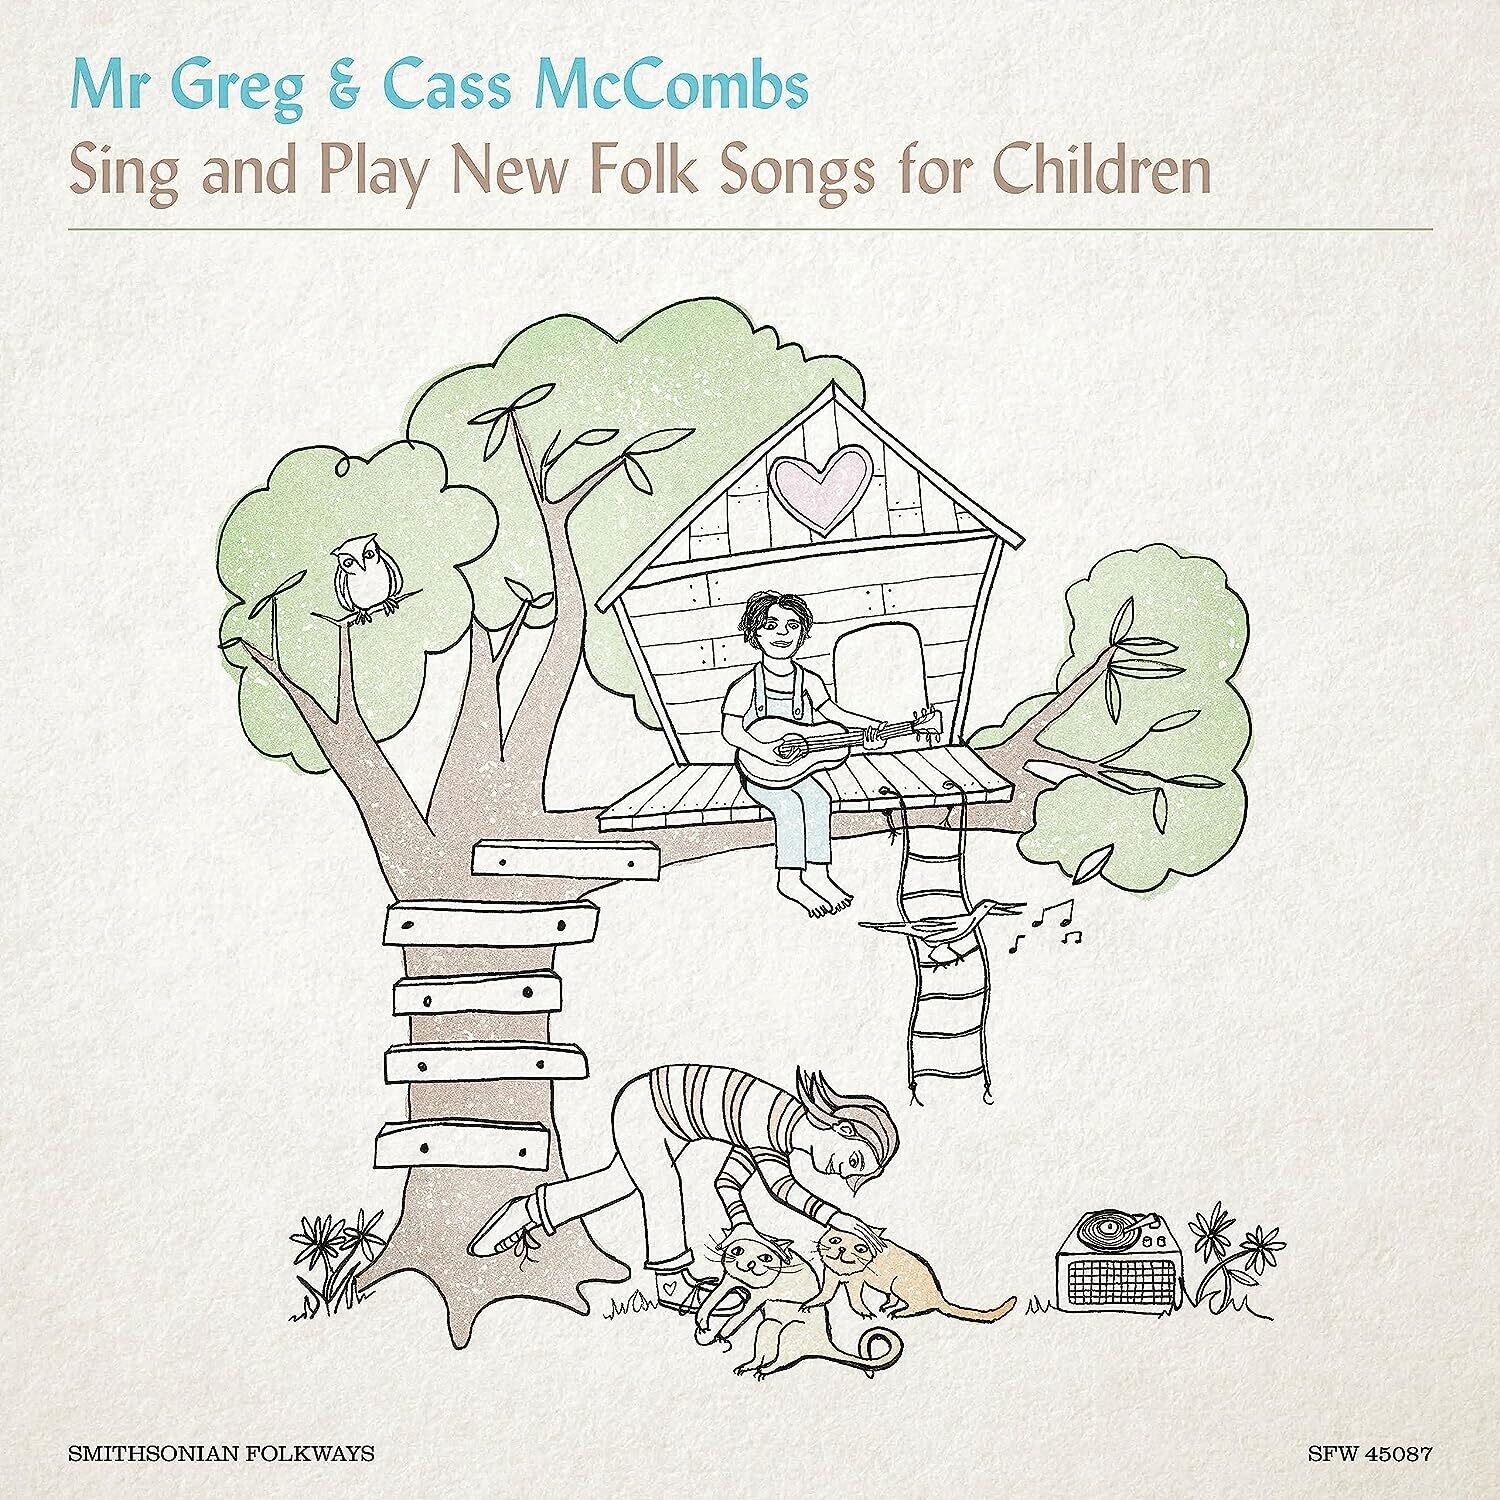 Mr Greg & Cass McCombs "Sing and Play New Folk Songs for Children"